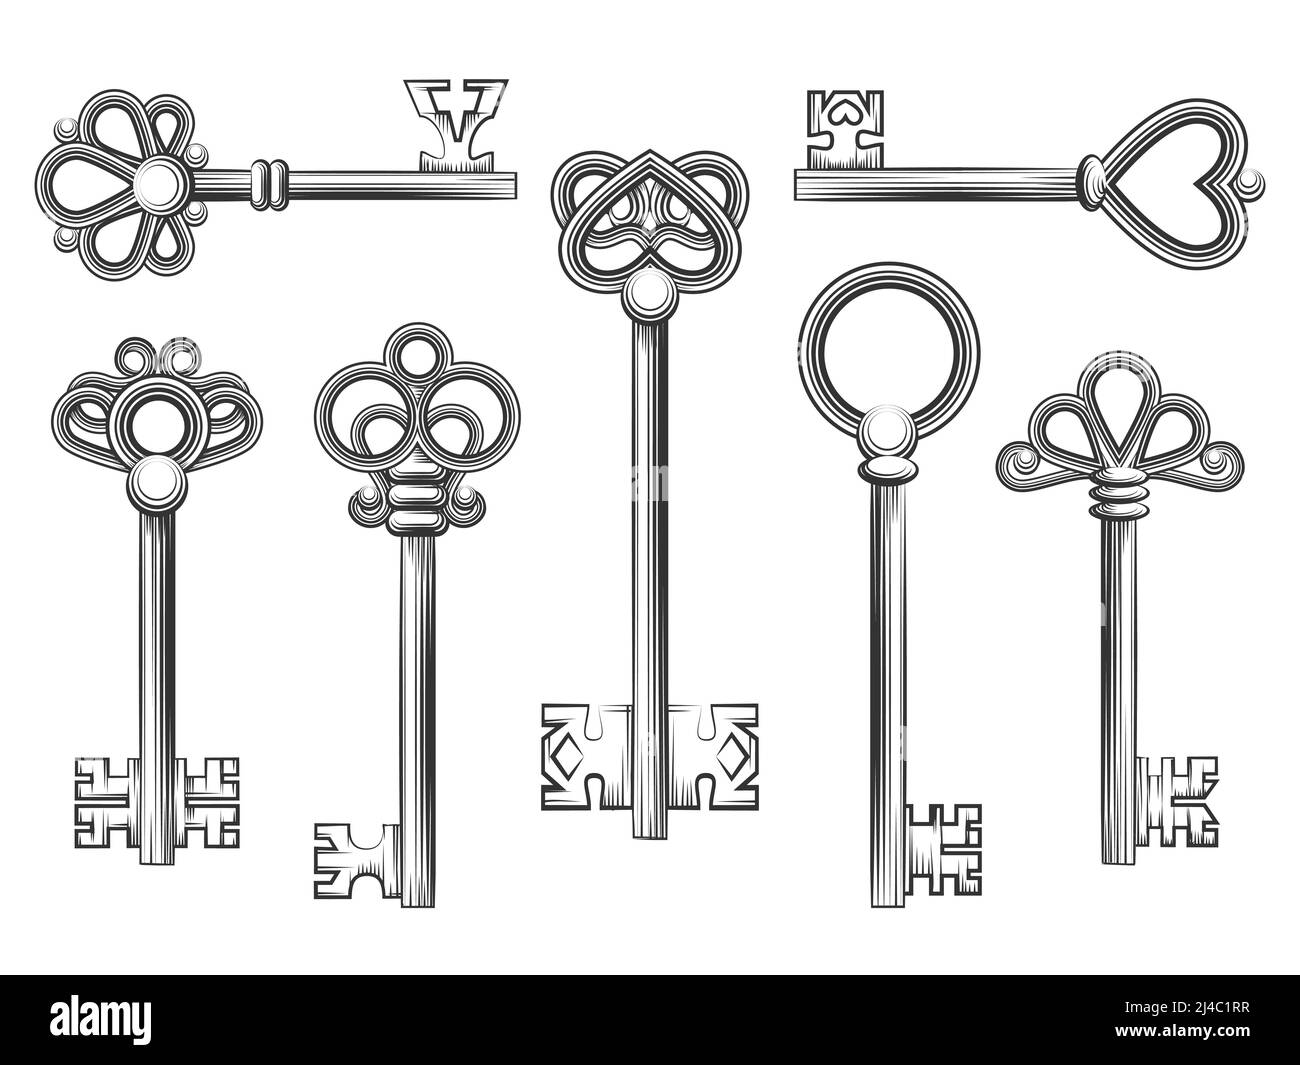 Vintage key vector set in engraving style. Antique collection retro security design illustration Stock Vector